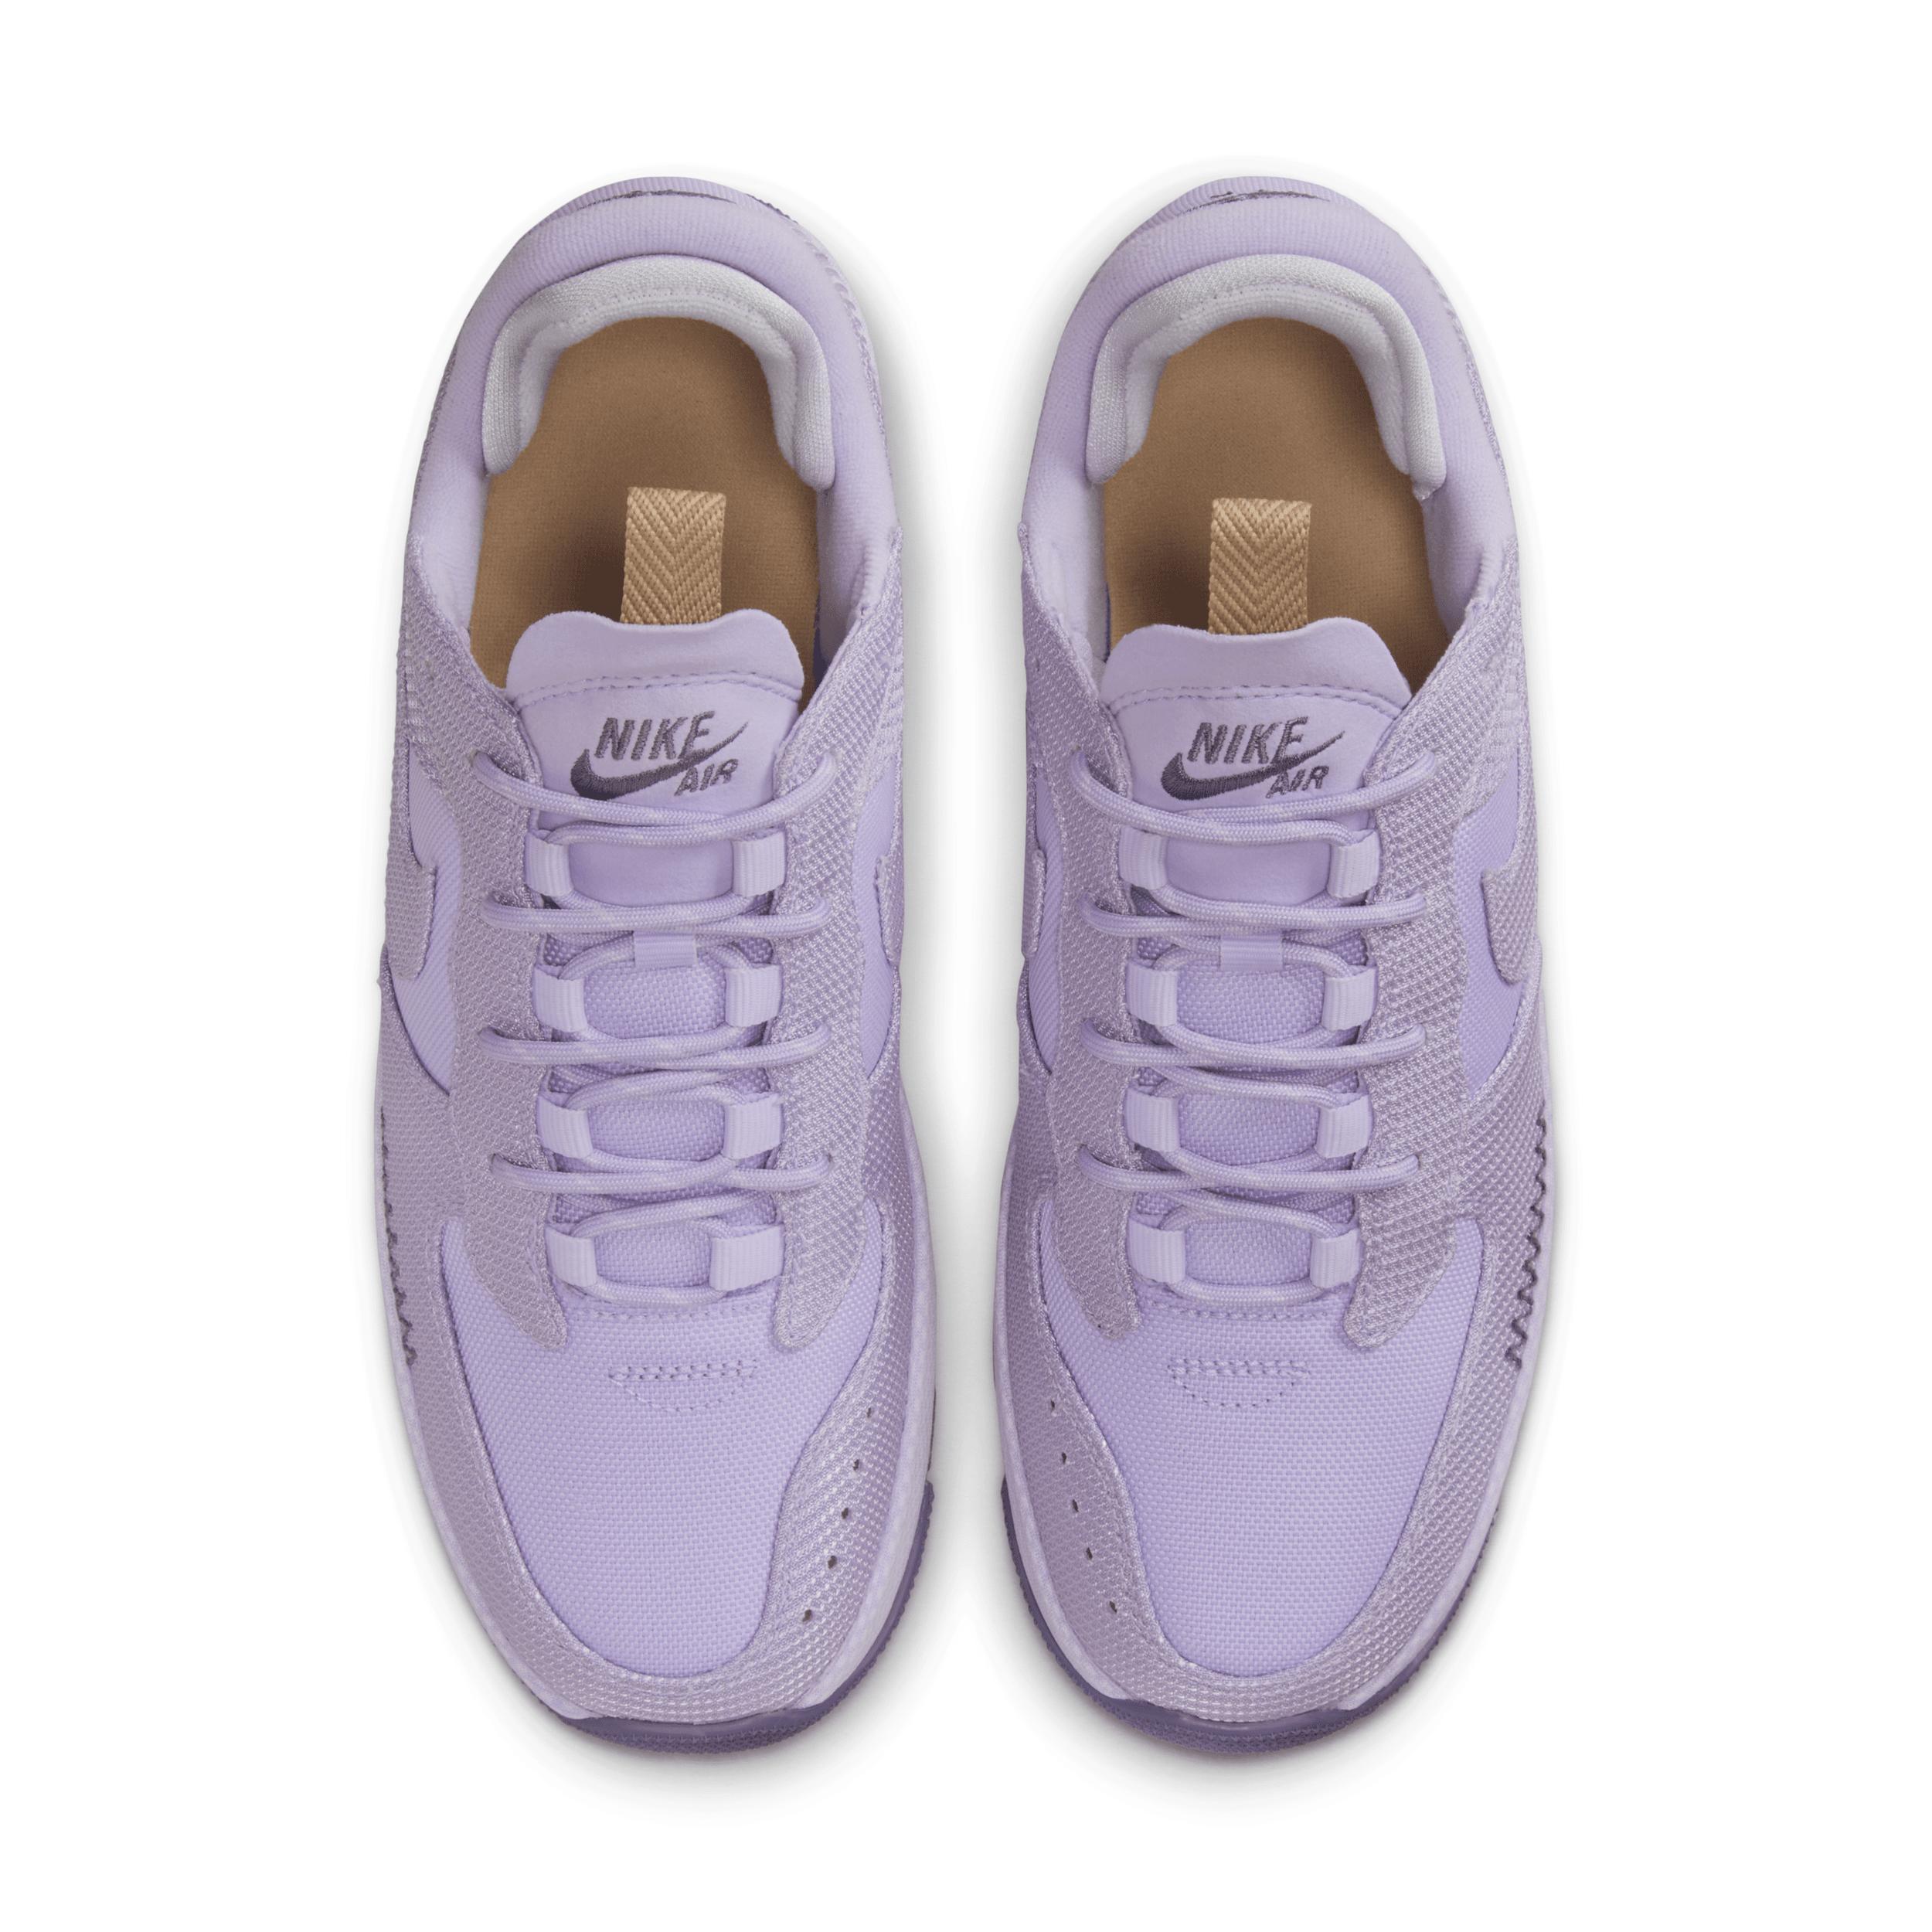 Nike Women's Air Force 1 Wild Shoes Product Image